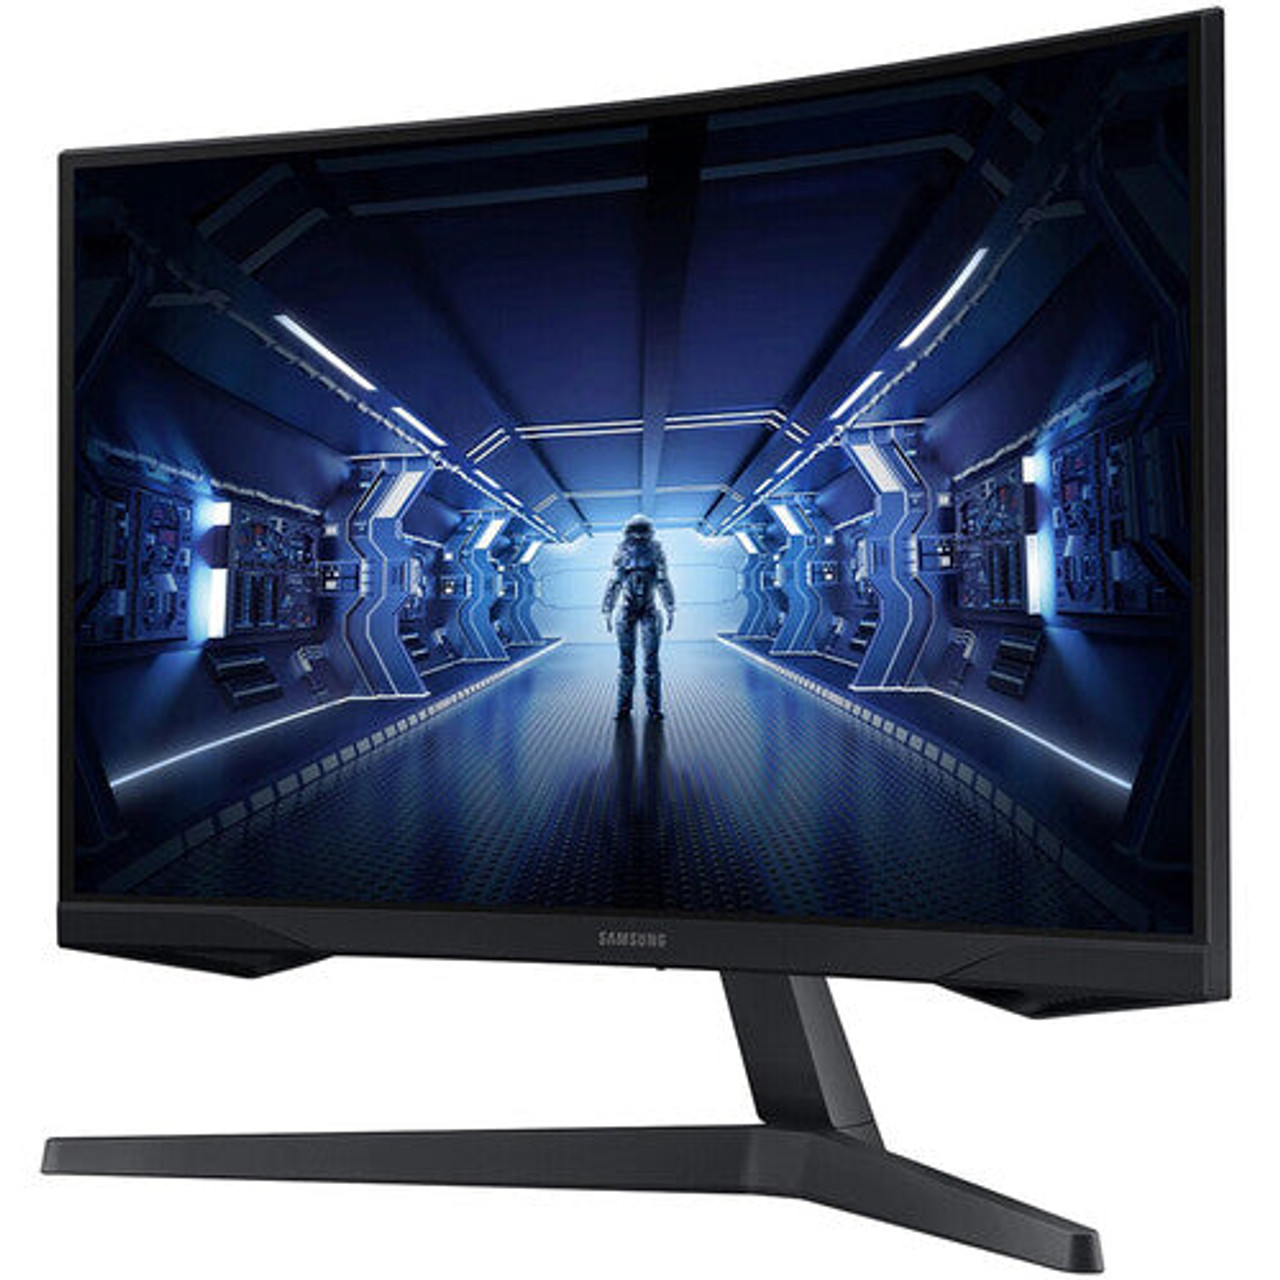 Samsung LC32G57TQWNXDC-RB 32" G5 Curved Gaming Monitor - Certified Refurbished